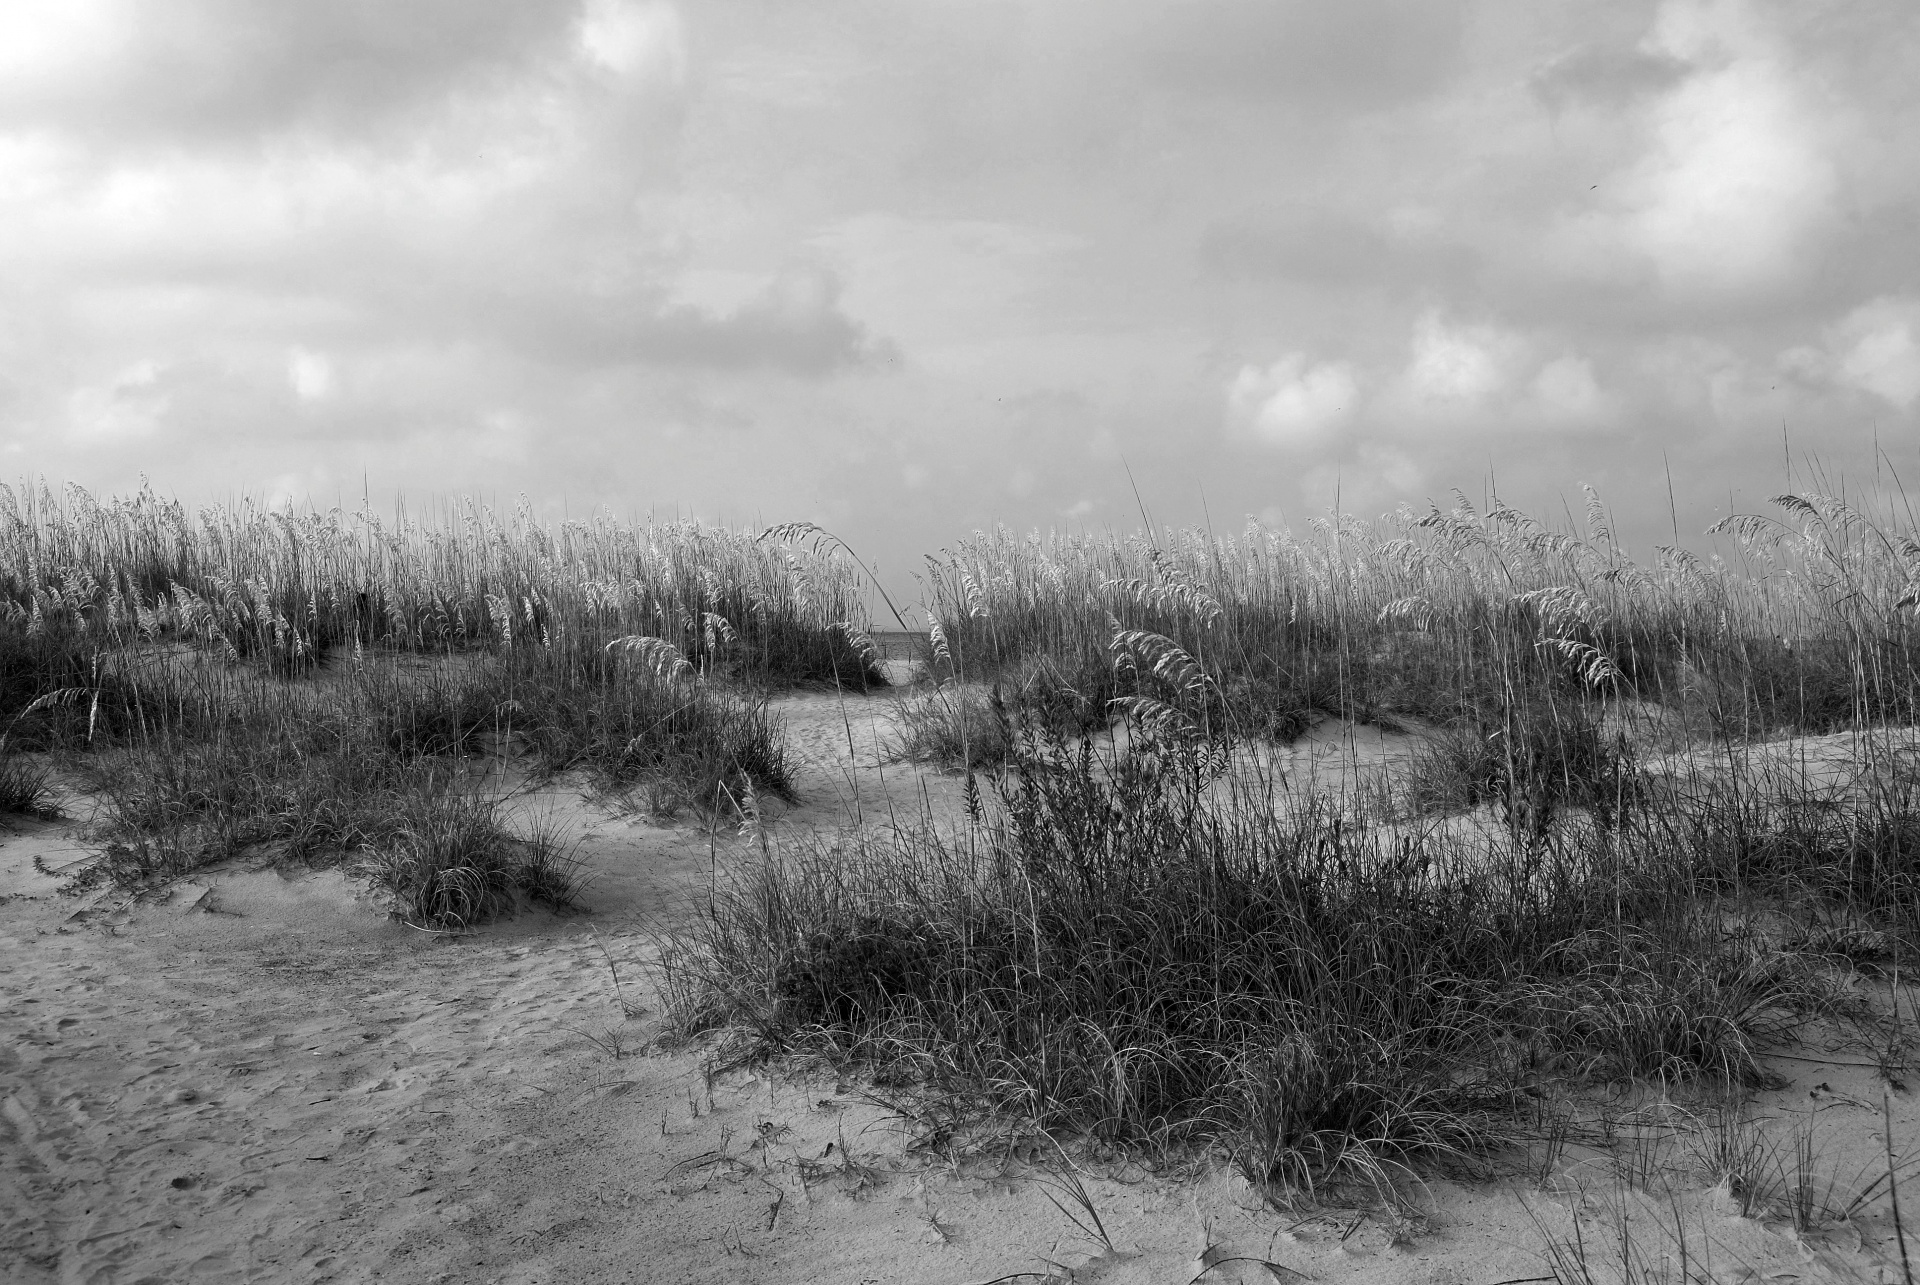 Sea oats on the beach at Florida, USA black and white image